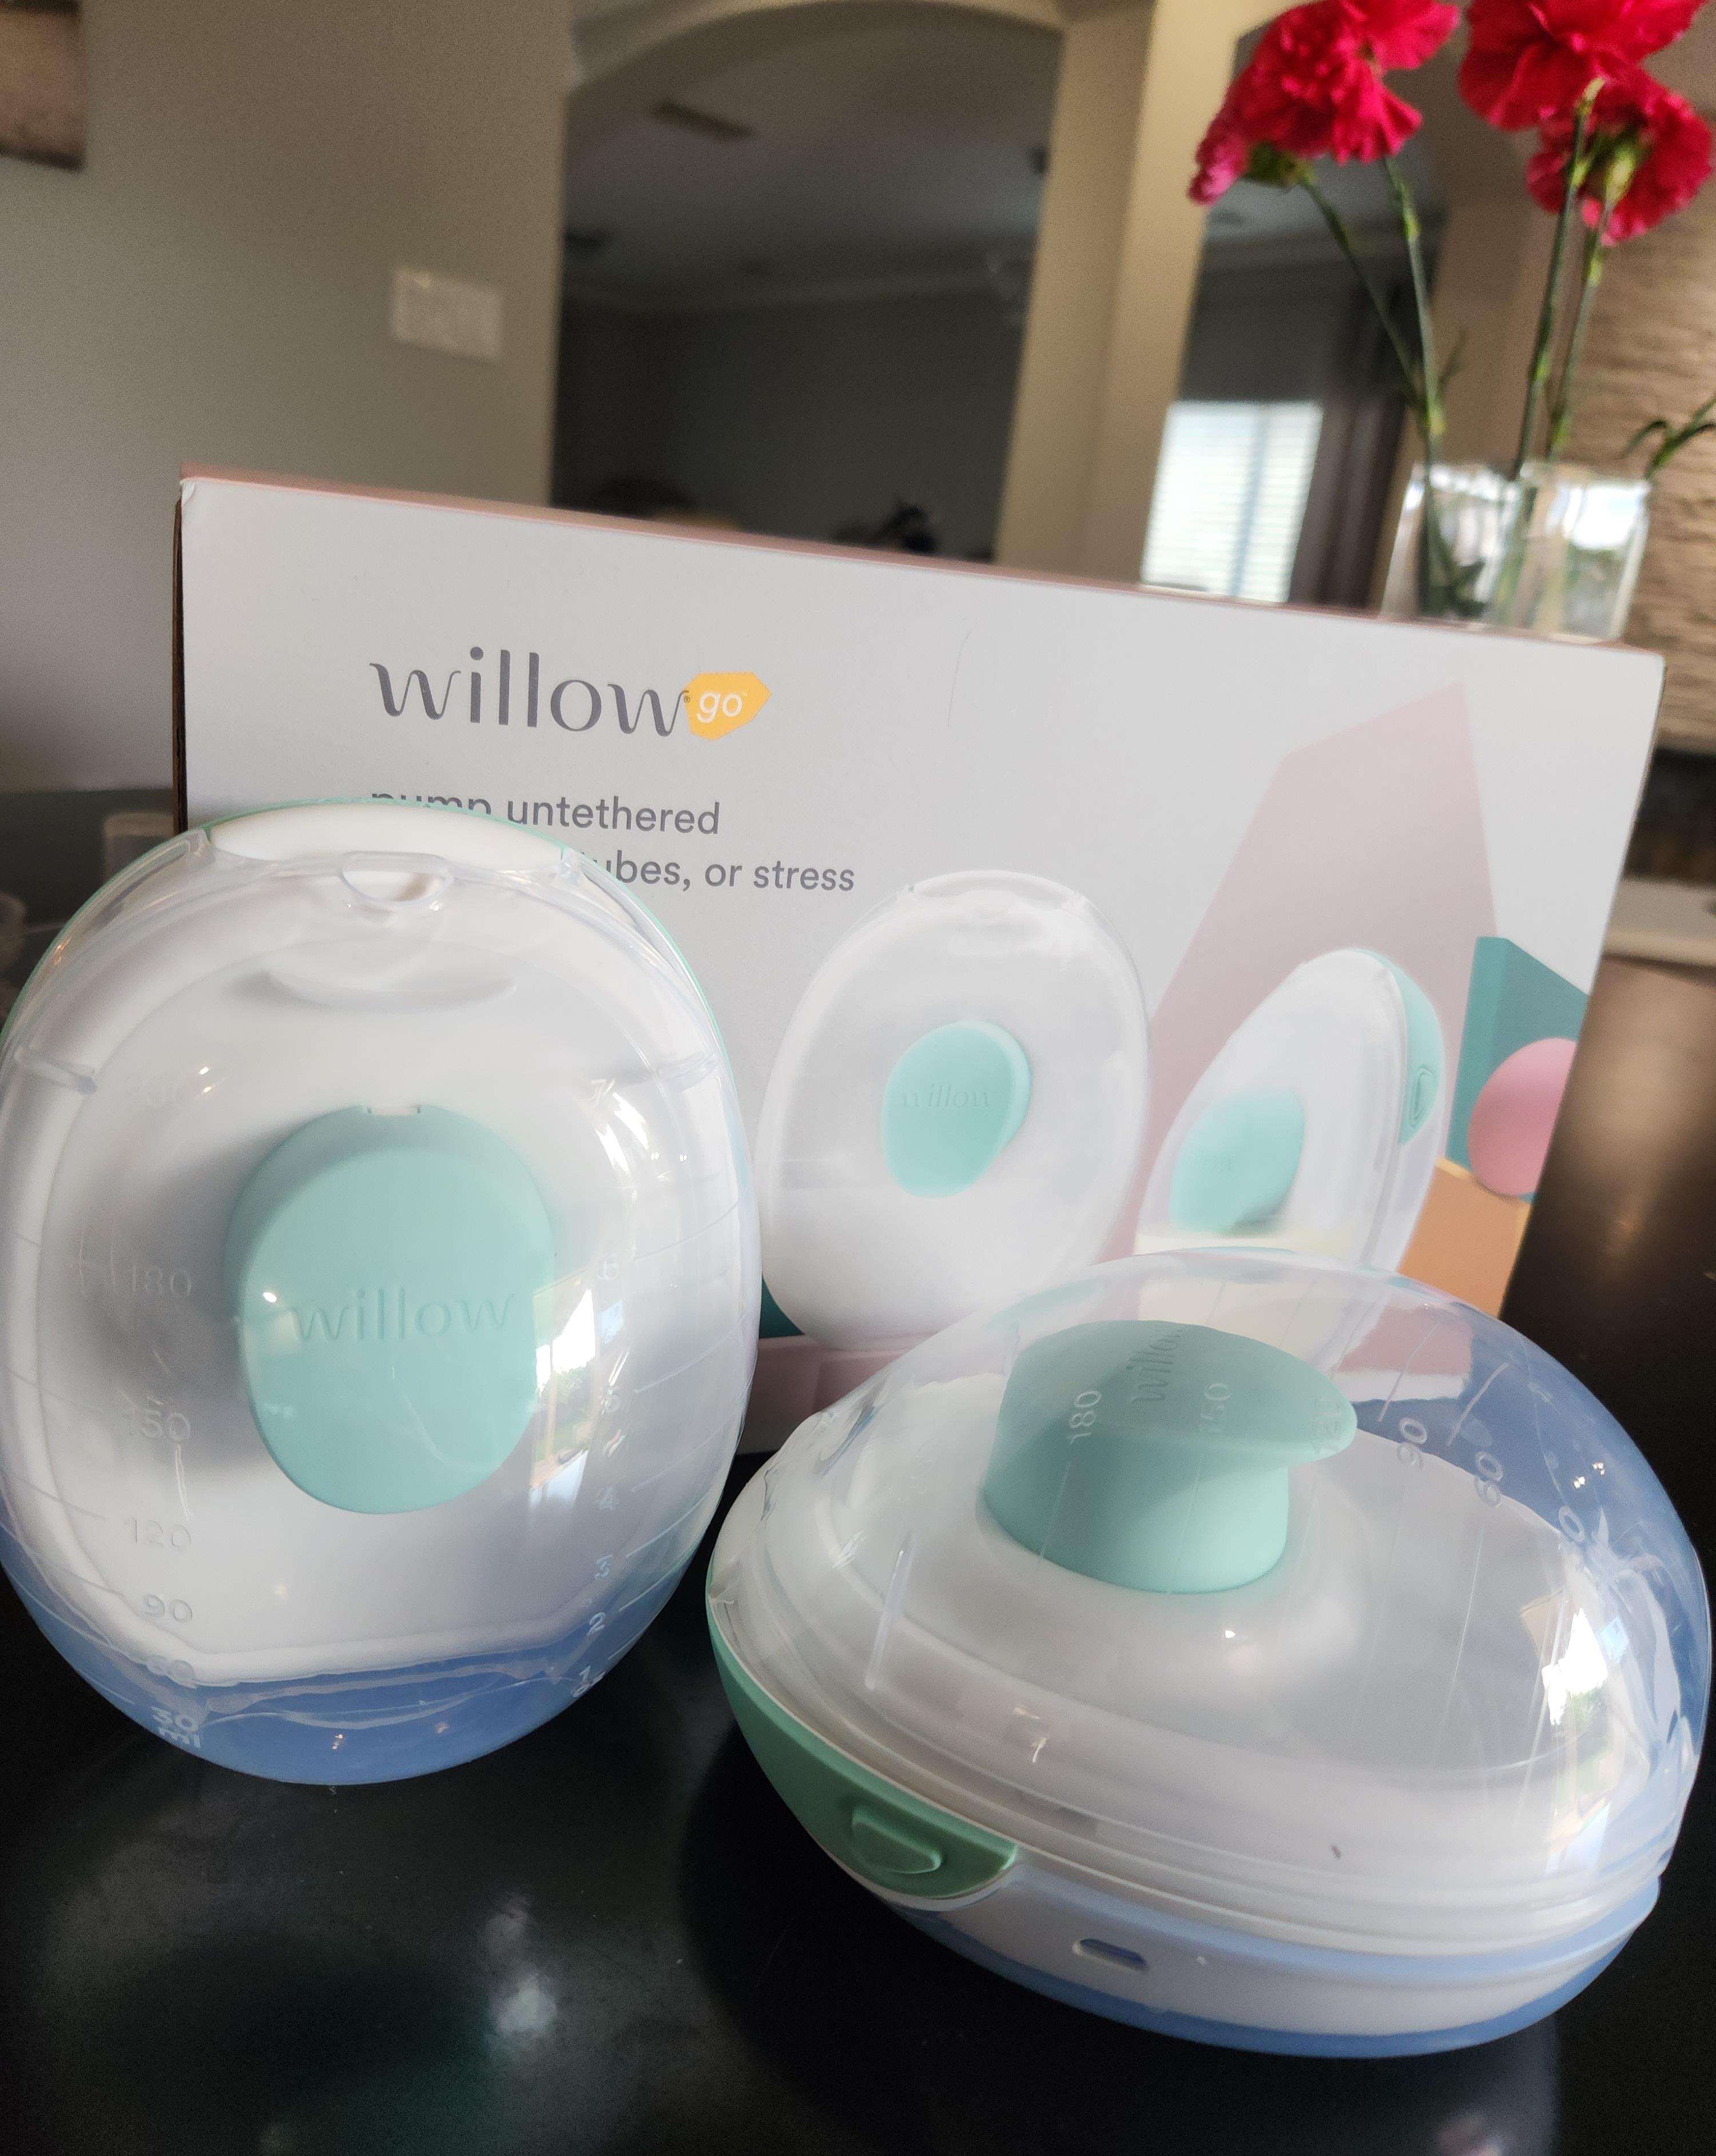 Best Bra for Willow and Elvie Pump